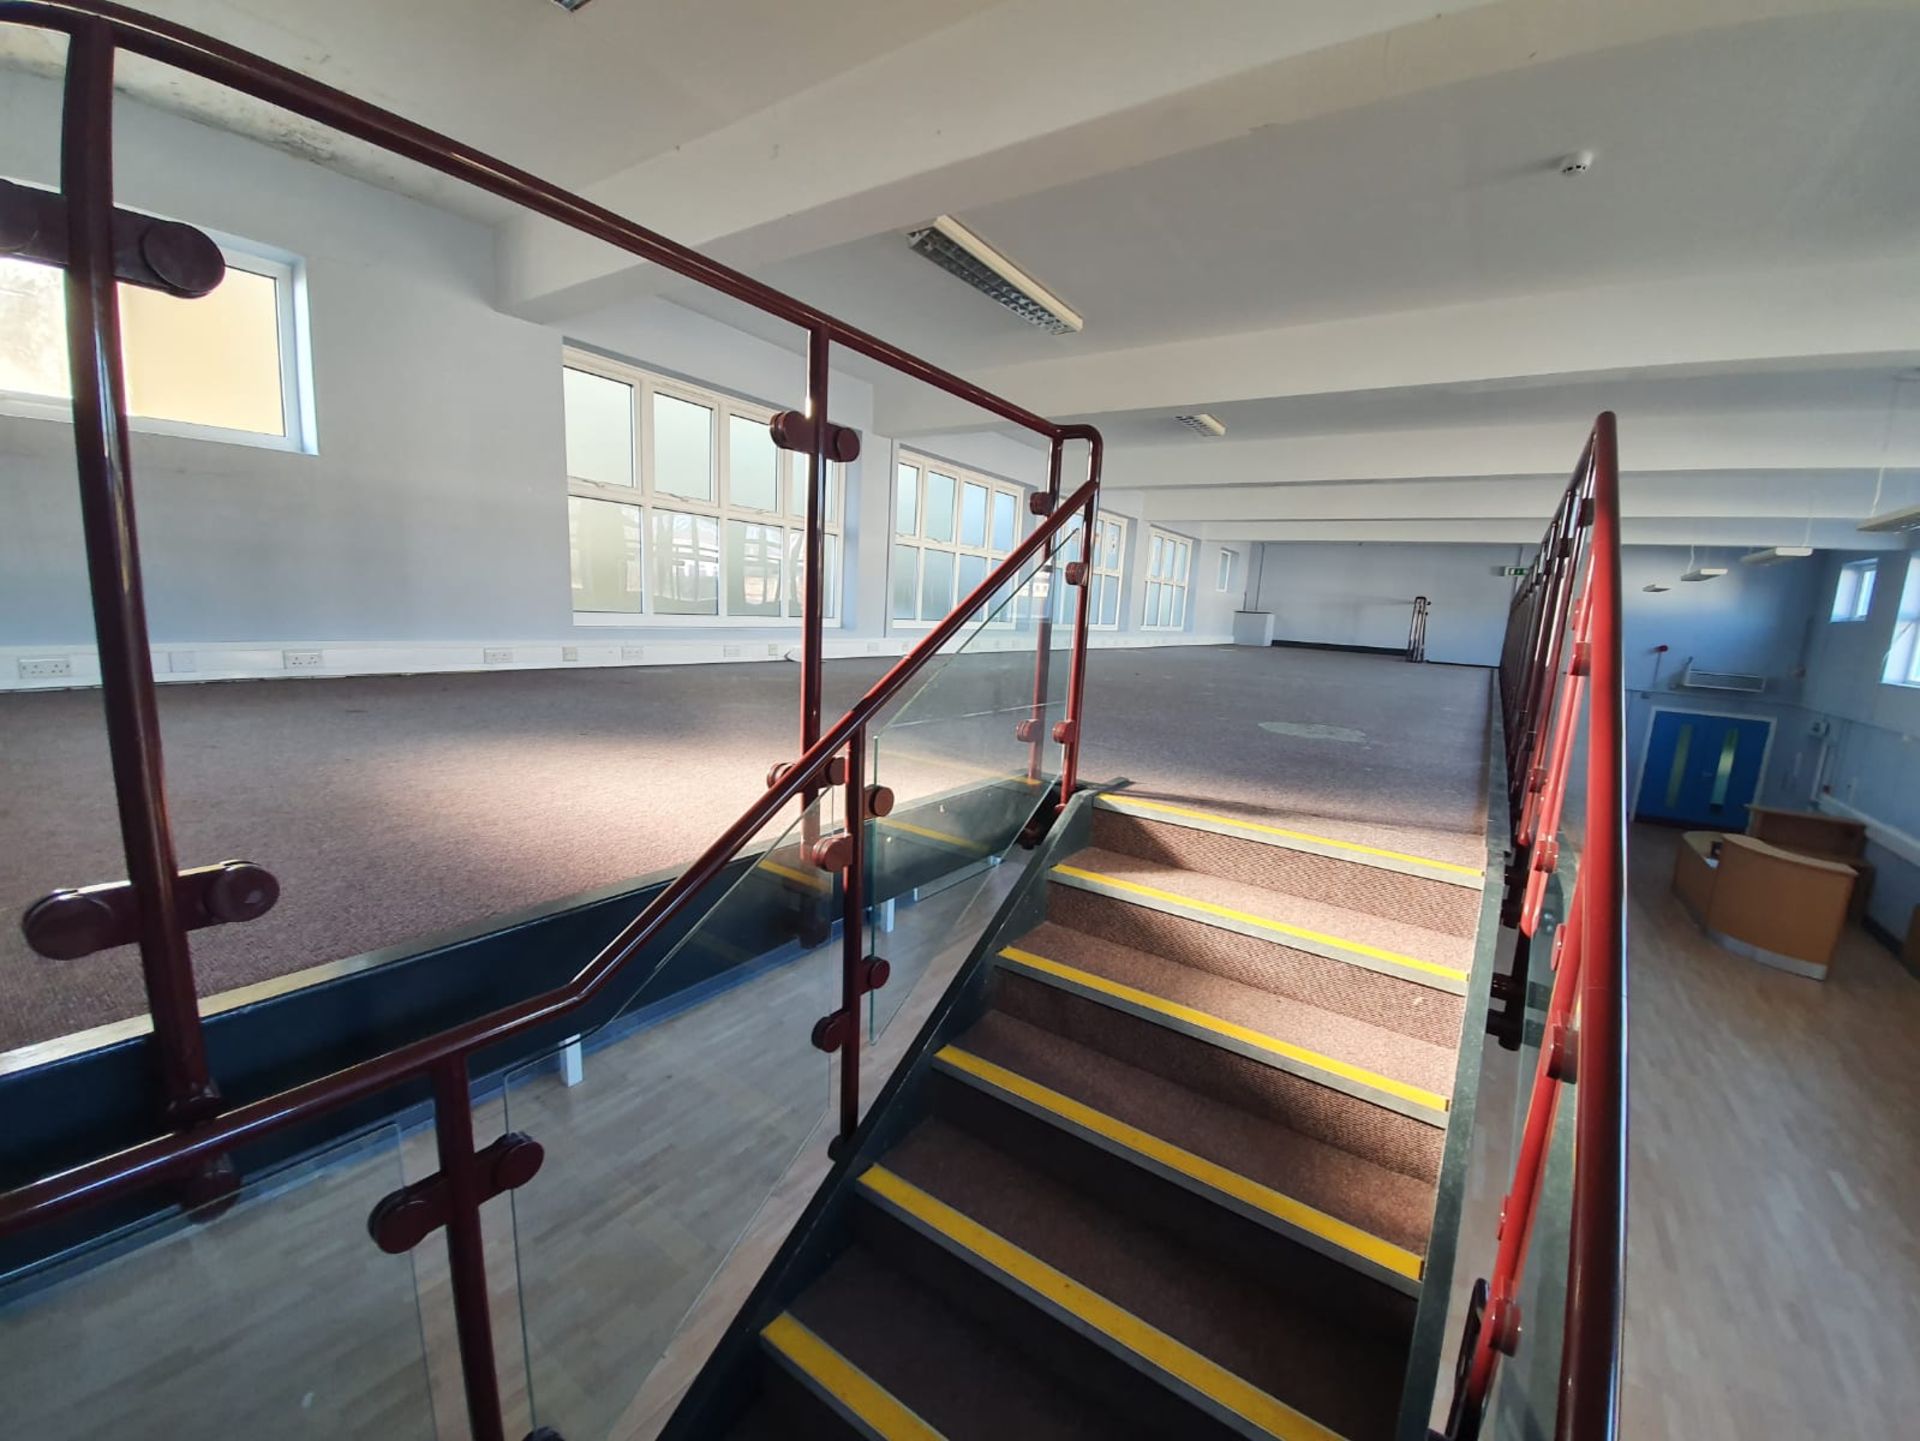 1 x Mezzanine Floor With Two Sets of Floating Stairs and Glazed Safety Panels With Hand Rails - From - Image 14 of 18